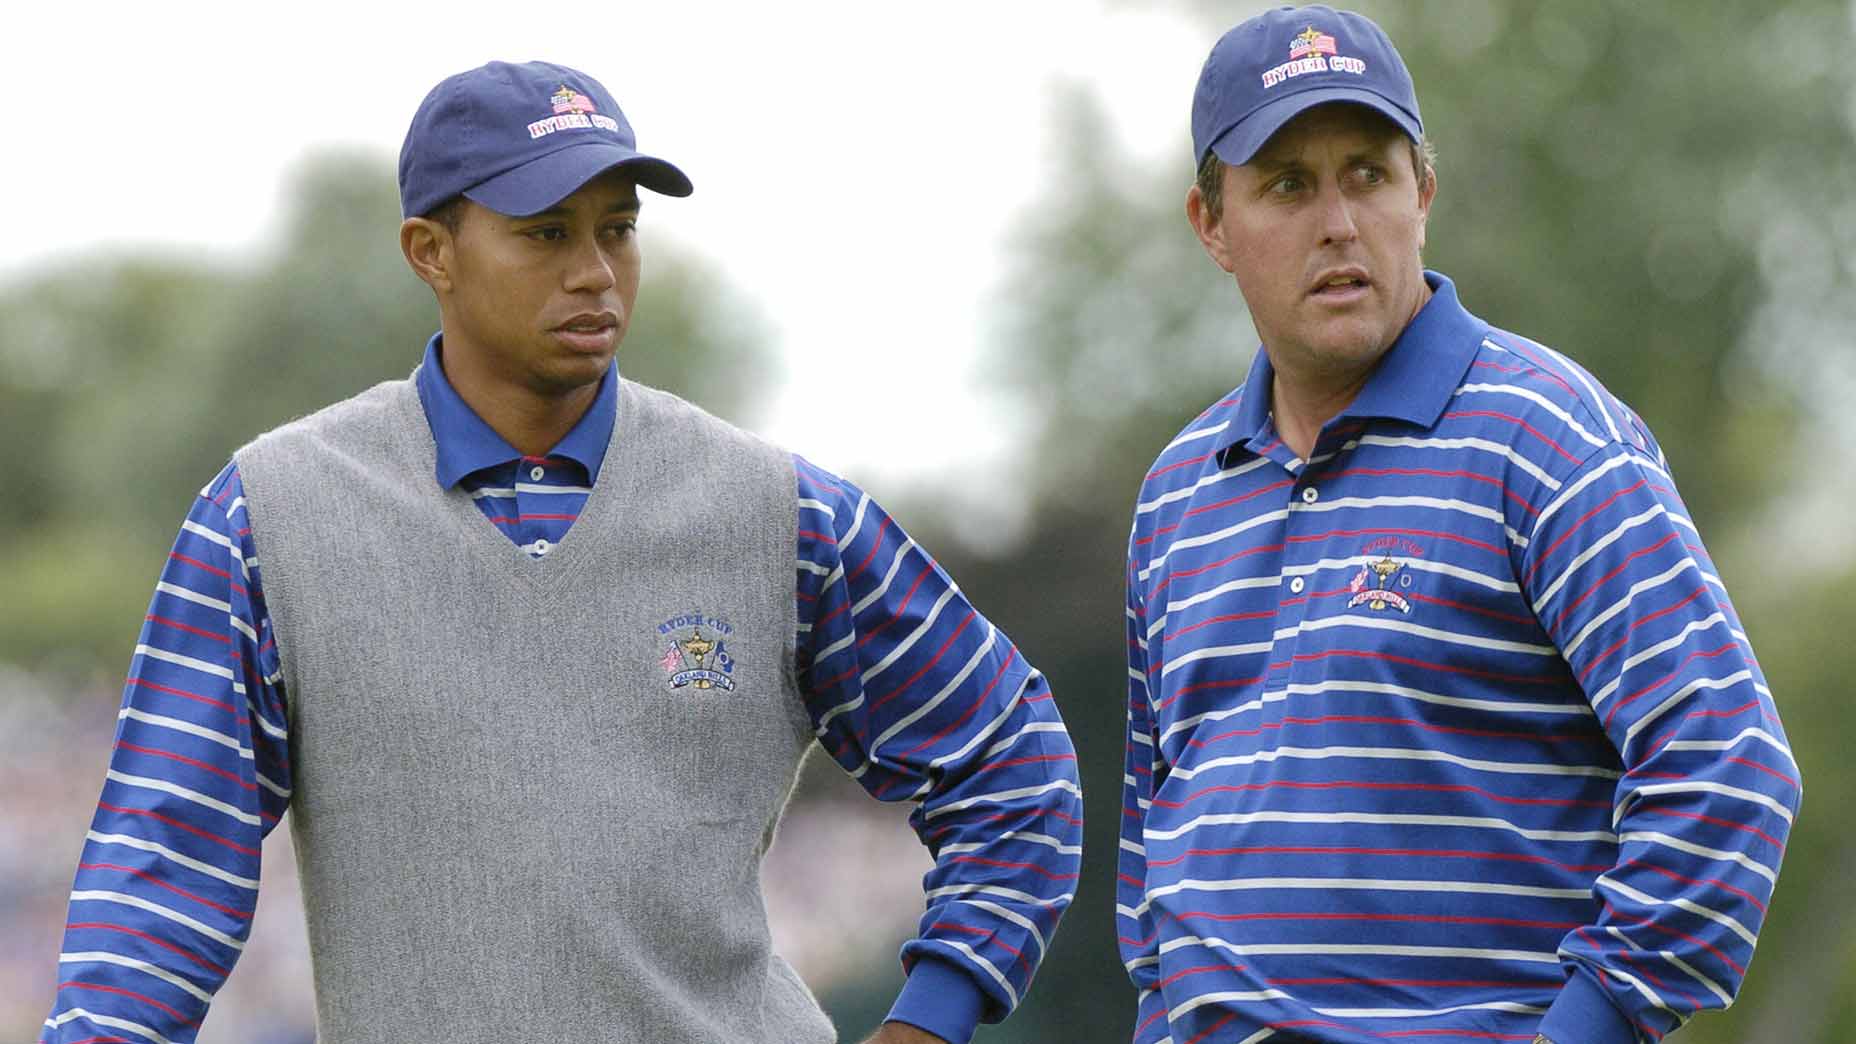 Fred Funk recalls Tiger Woods vent session during 2004 Ryder Cup debacle